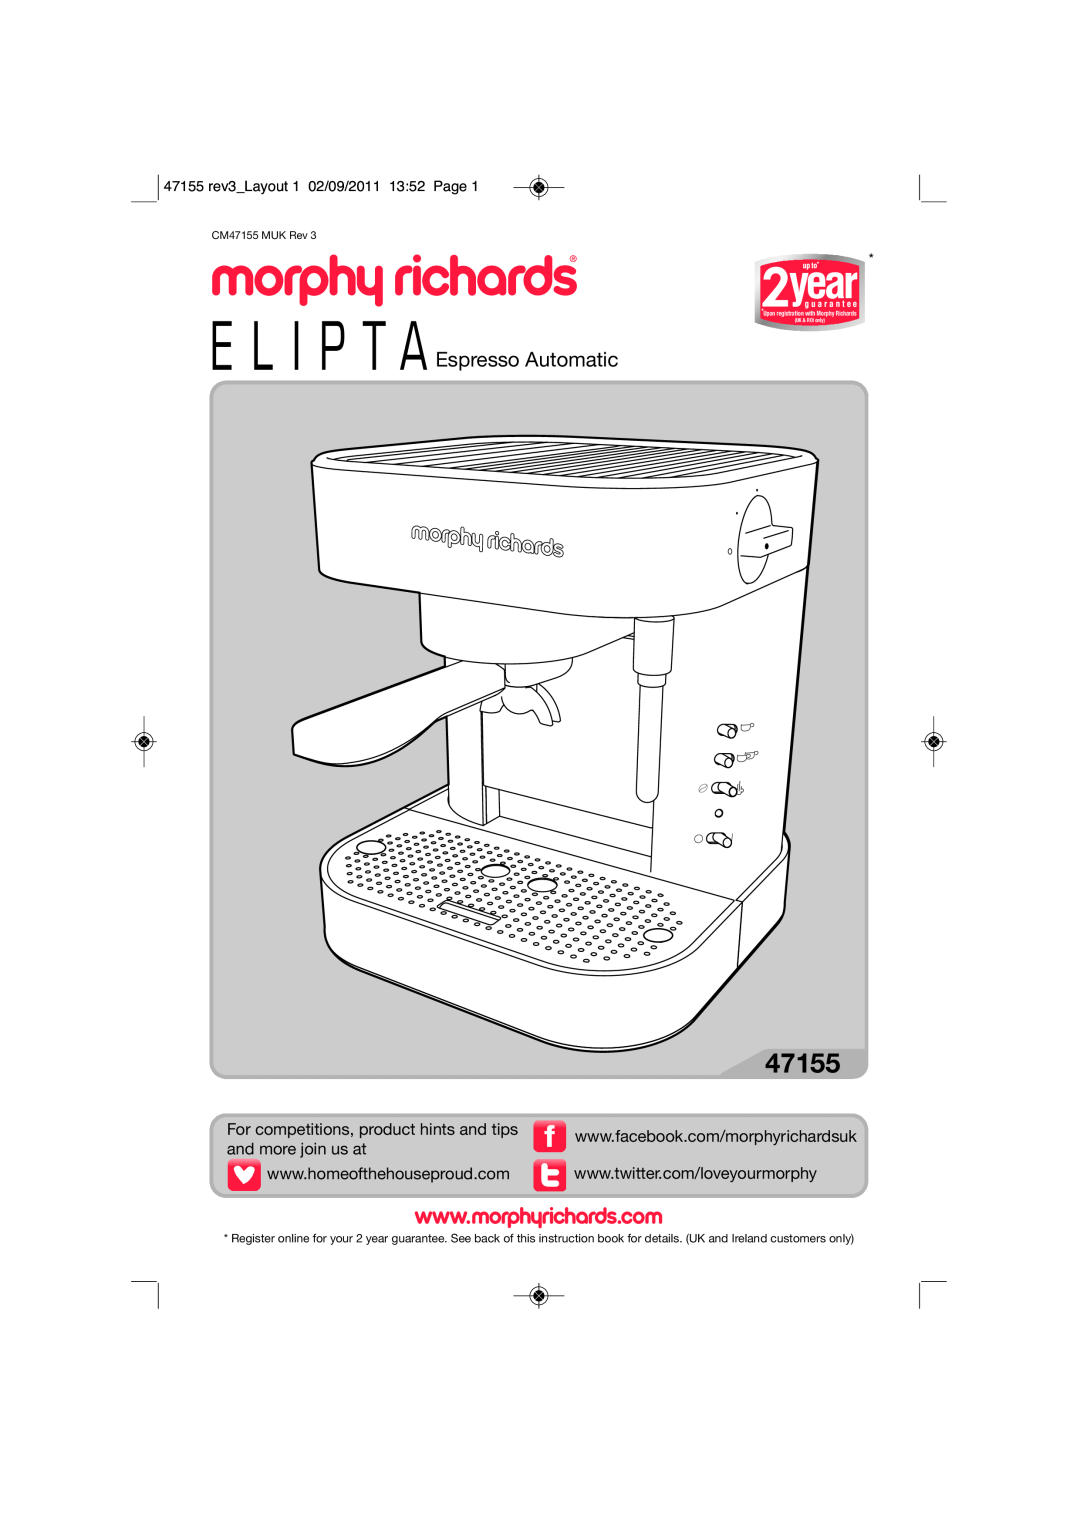 Morphy Richards manual 47155 rev3Layout 1 02/09/2011 1352 Page, Espresso Automatic, UK & ROI only 